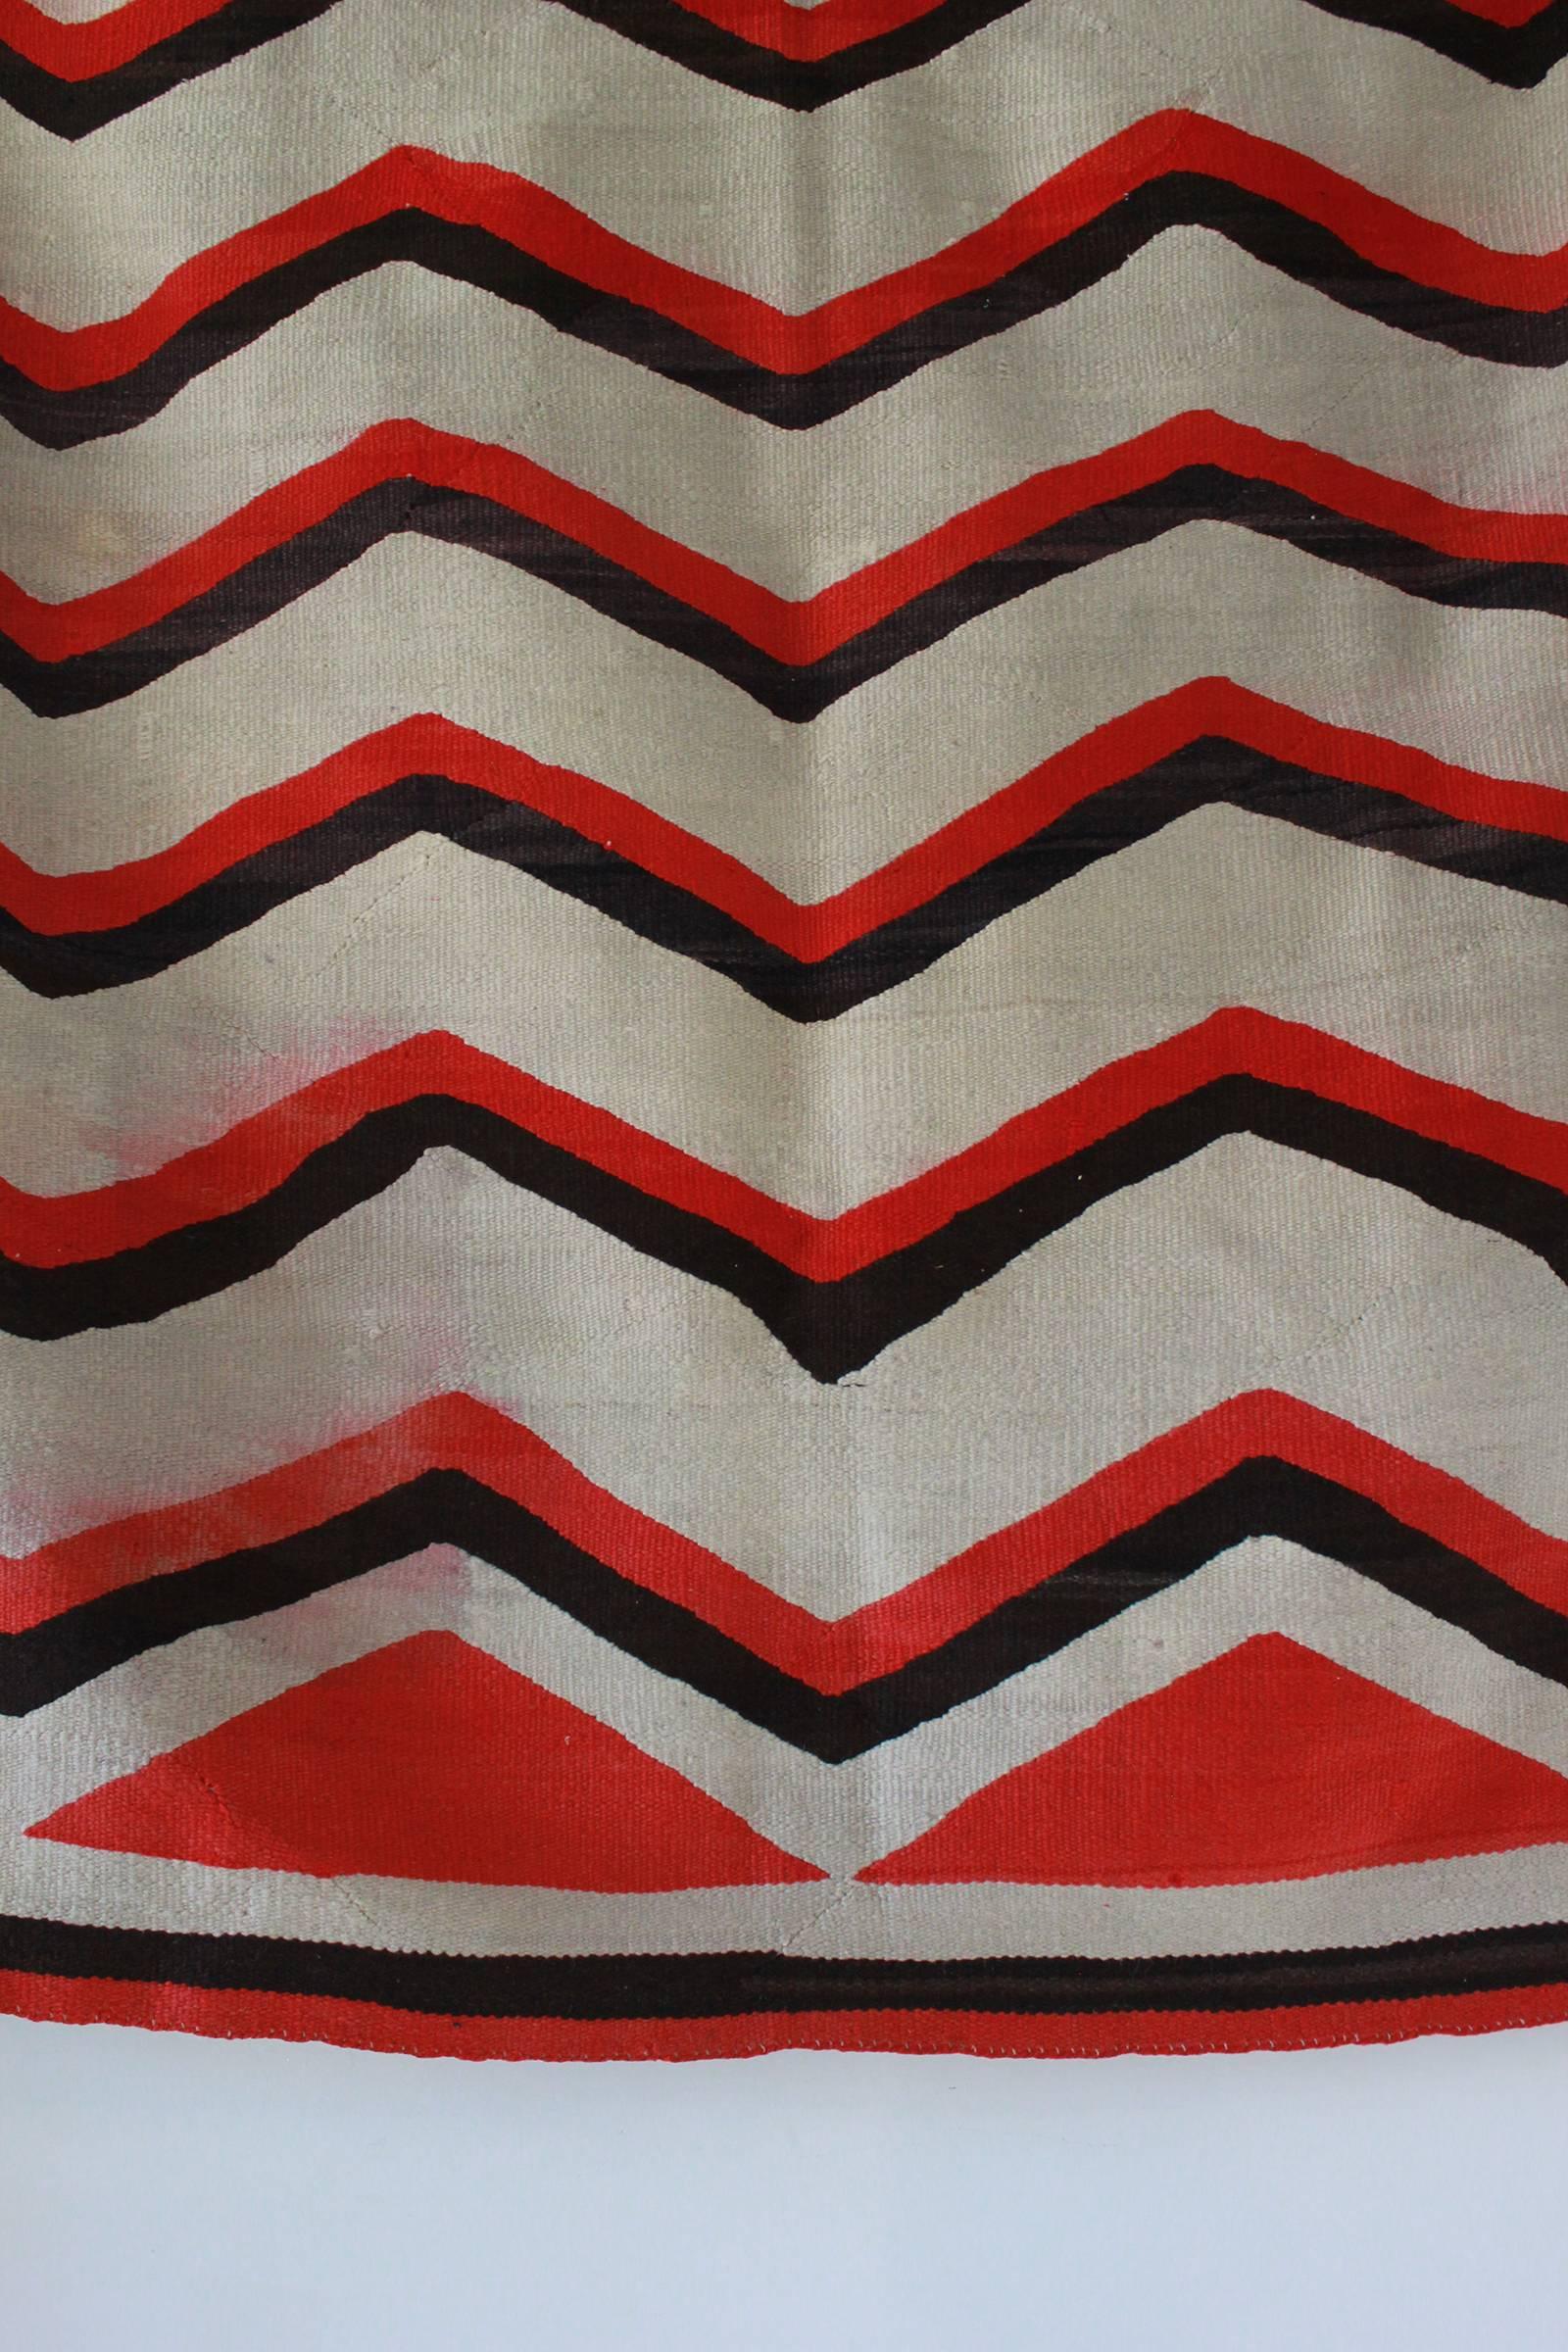 Mid-20th Century Wool Chevron Pattern Red and Brown Vintage Textile